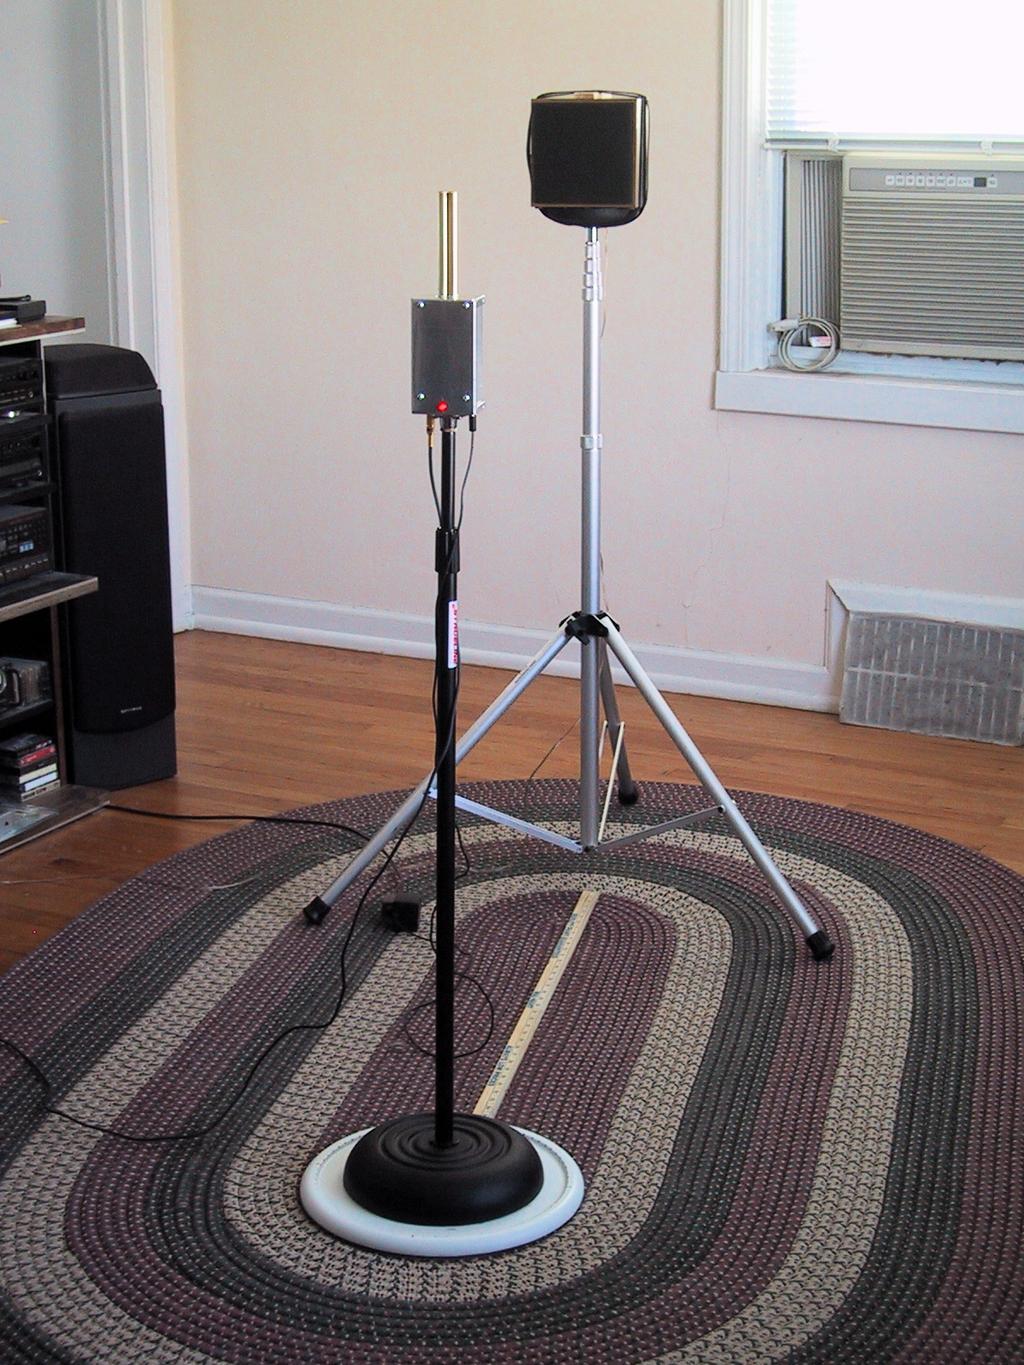 Photo 1. Auratone 5C Super Sound Cube loudspeaker mounted on top of a tripod-style mic stand.